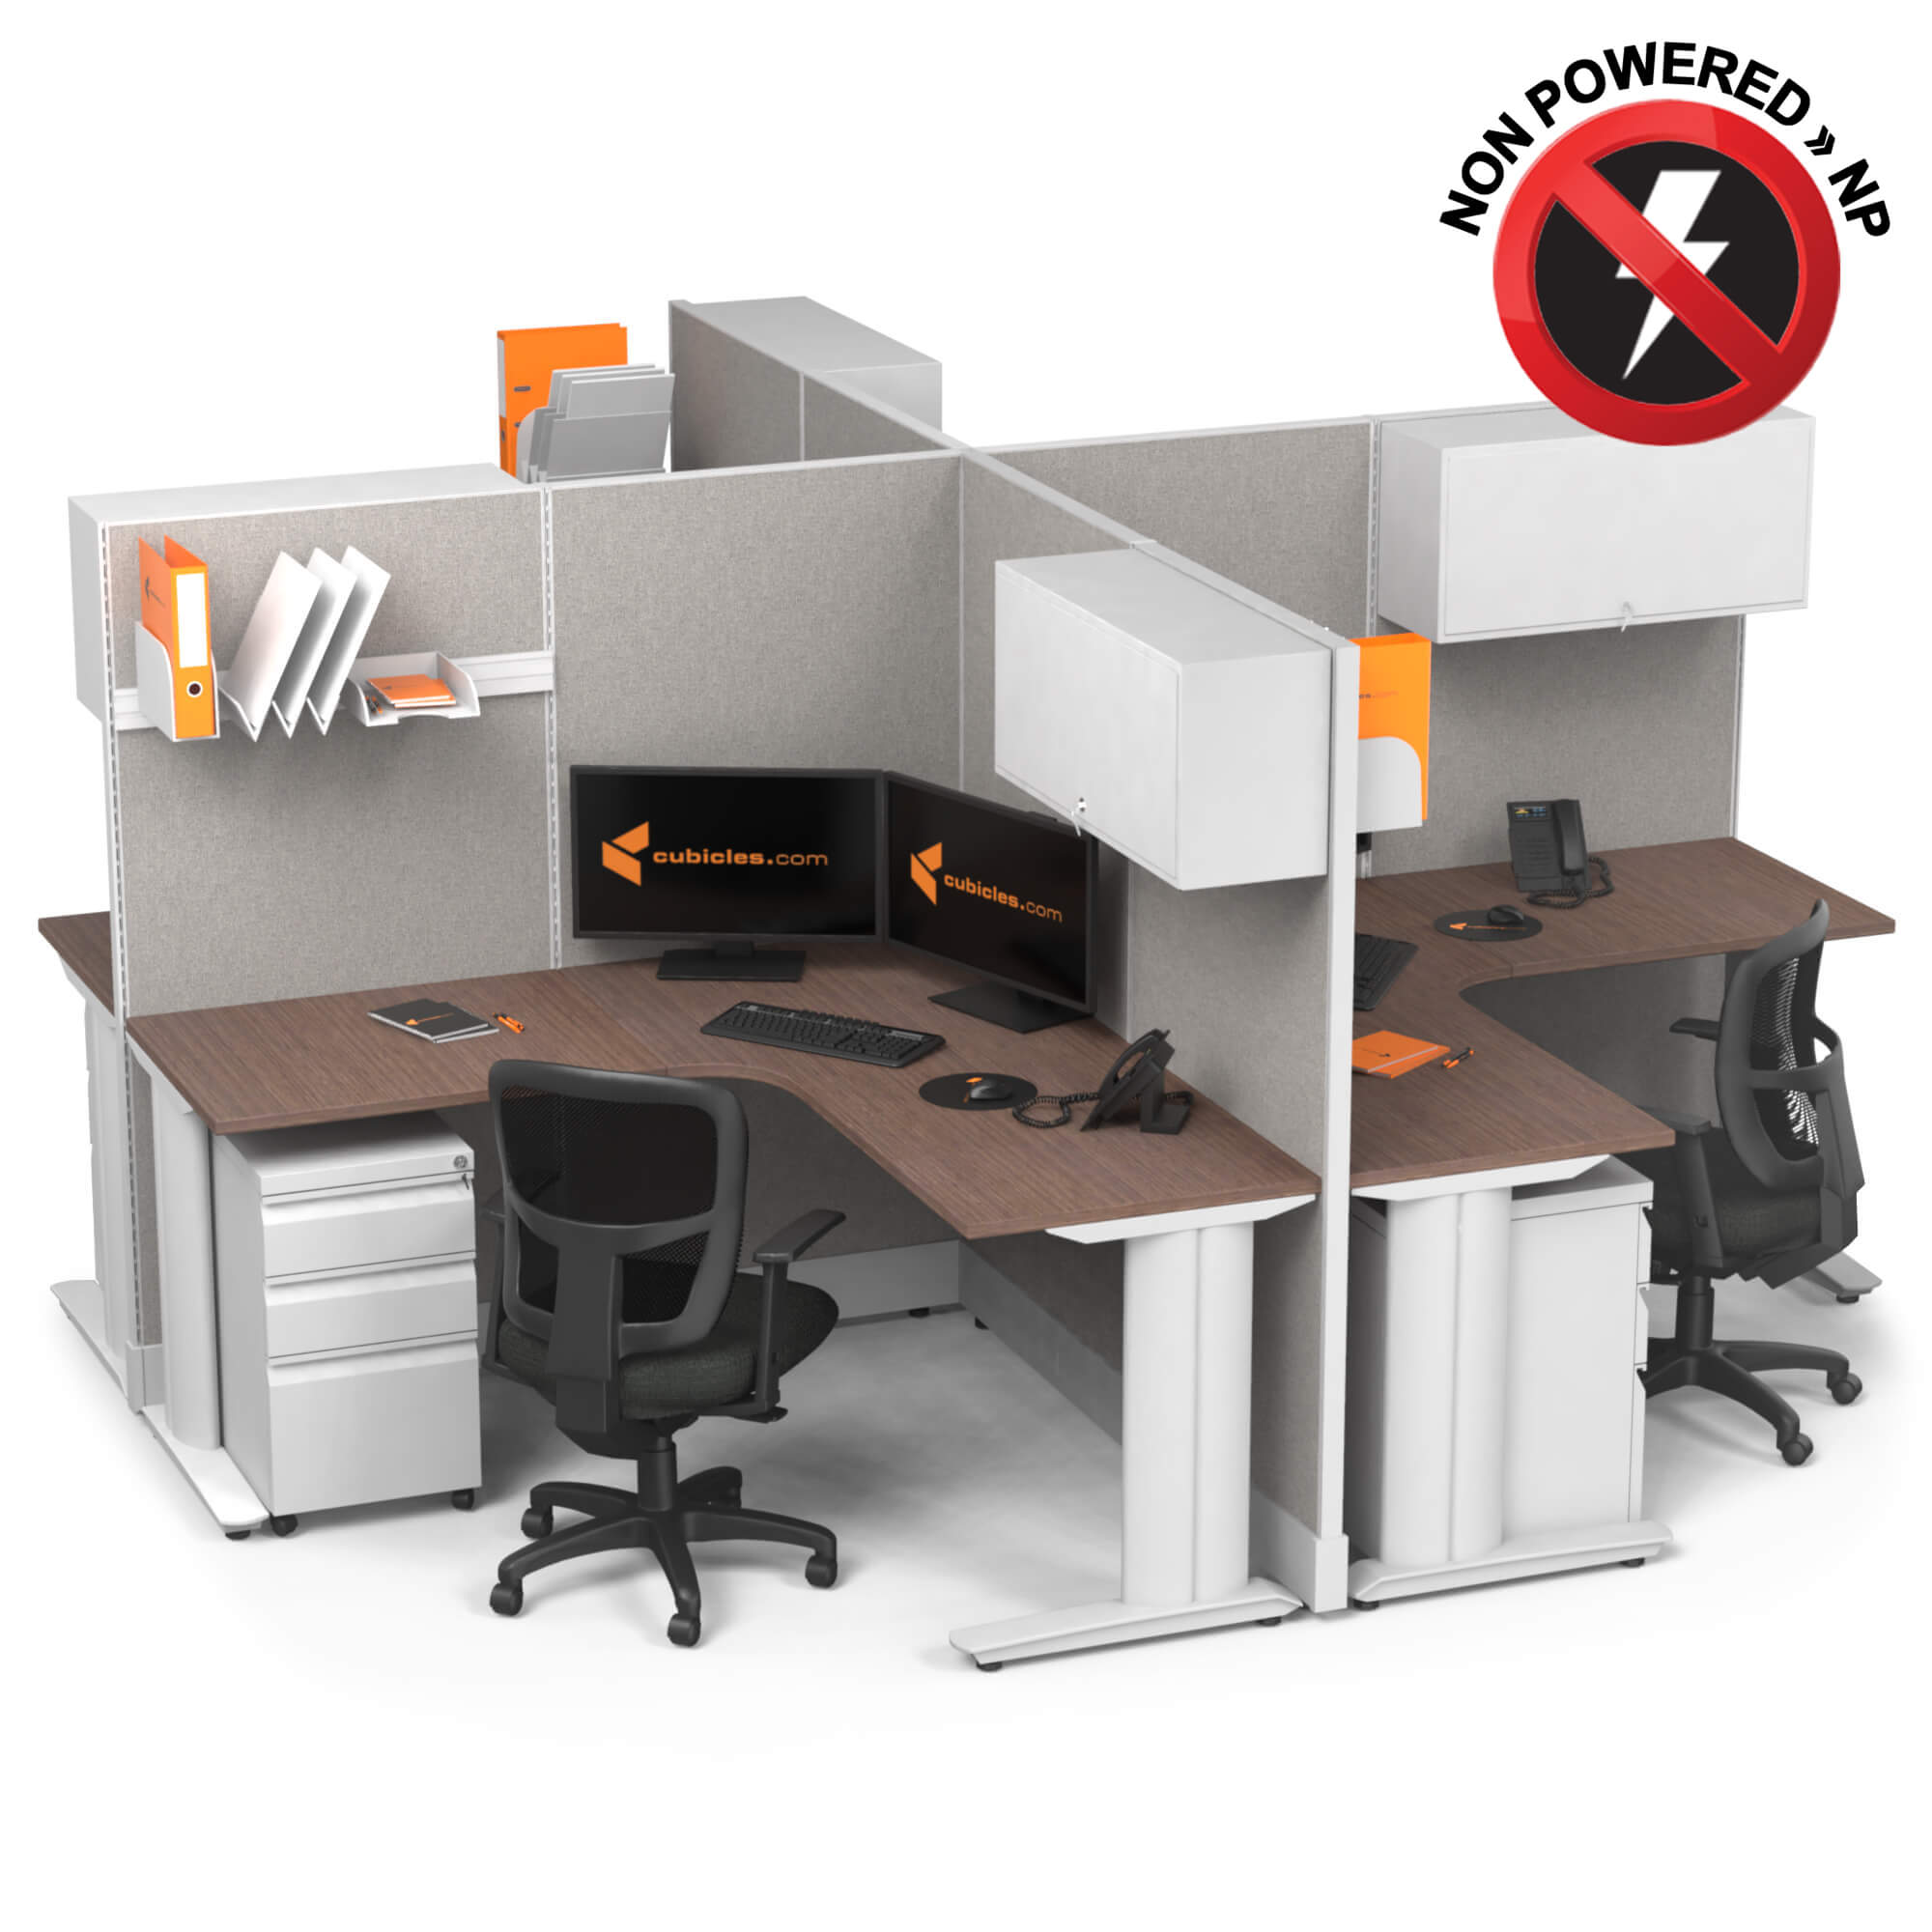 cubicle-desk-x-cluster-workstation-non-powered-with-storage-sign.jpg